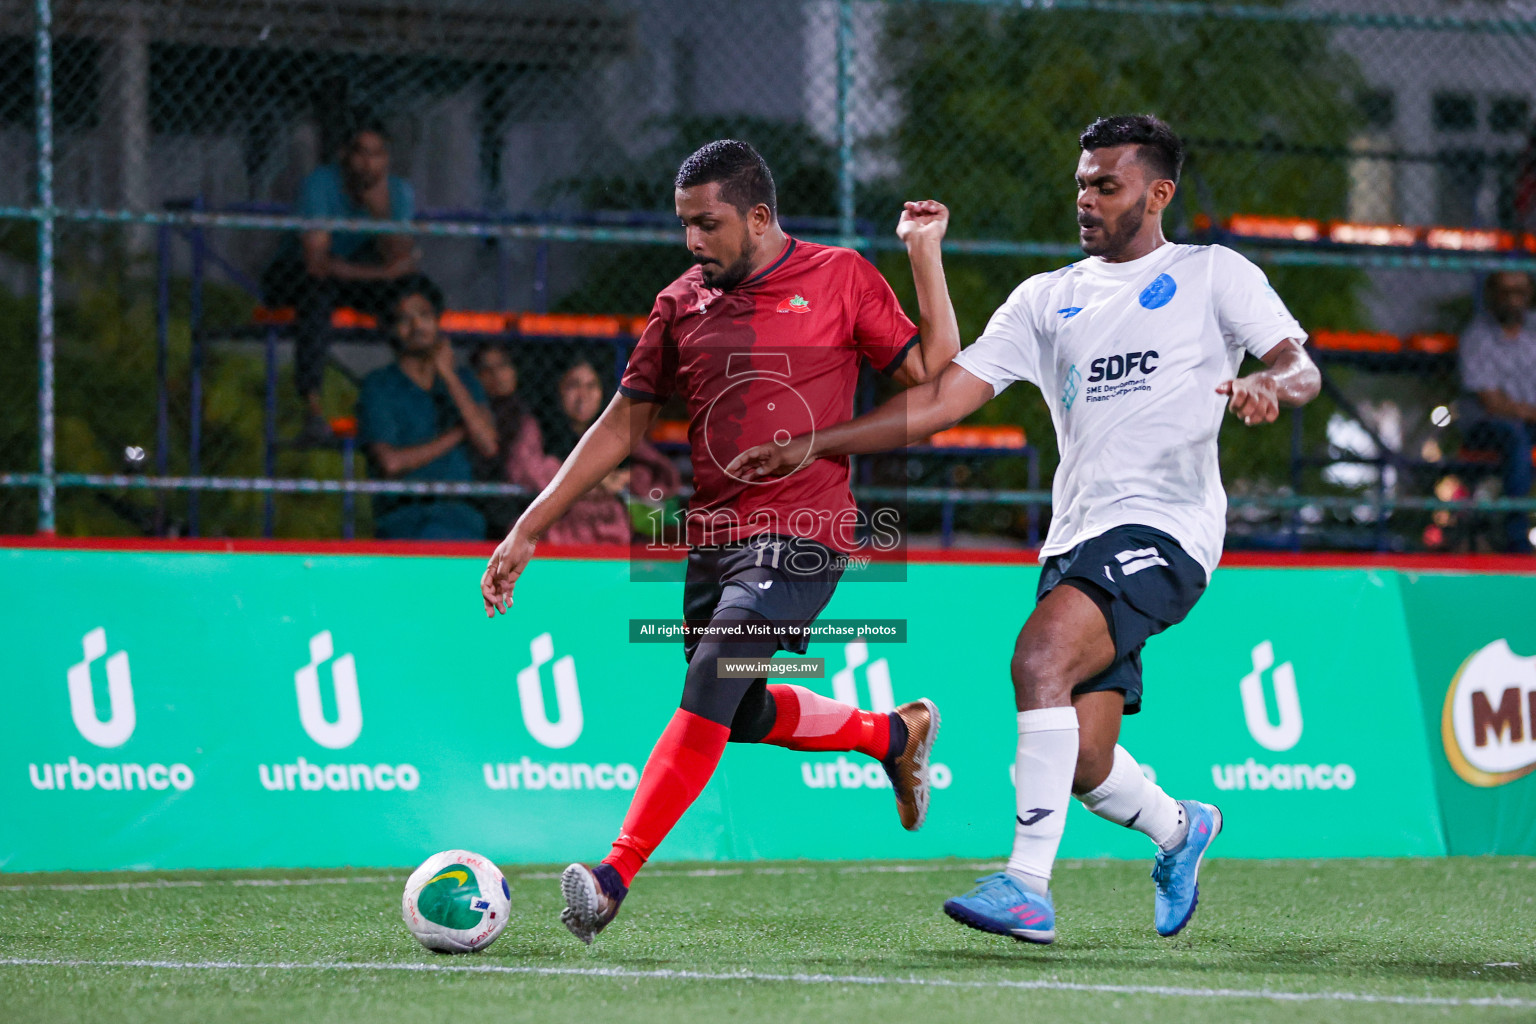 Trade Club vs ACCRC in Club Maldives Cup Classic 2023 held in Hulhumale, Maldives on 15 July 2023